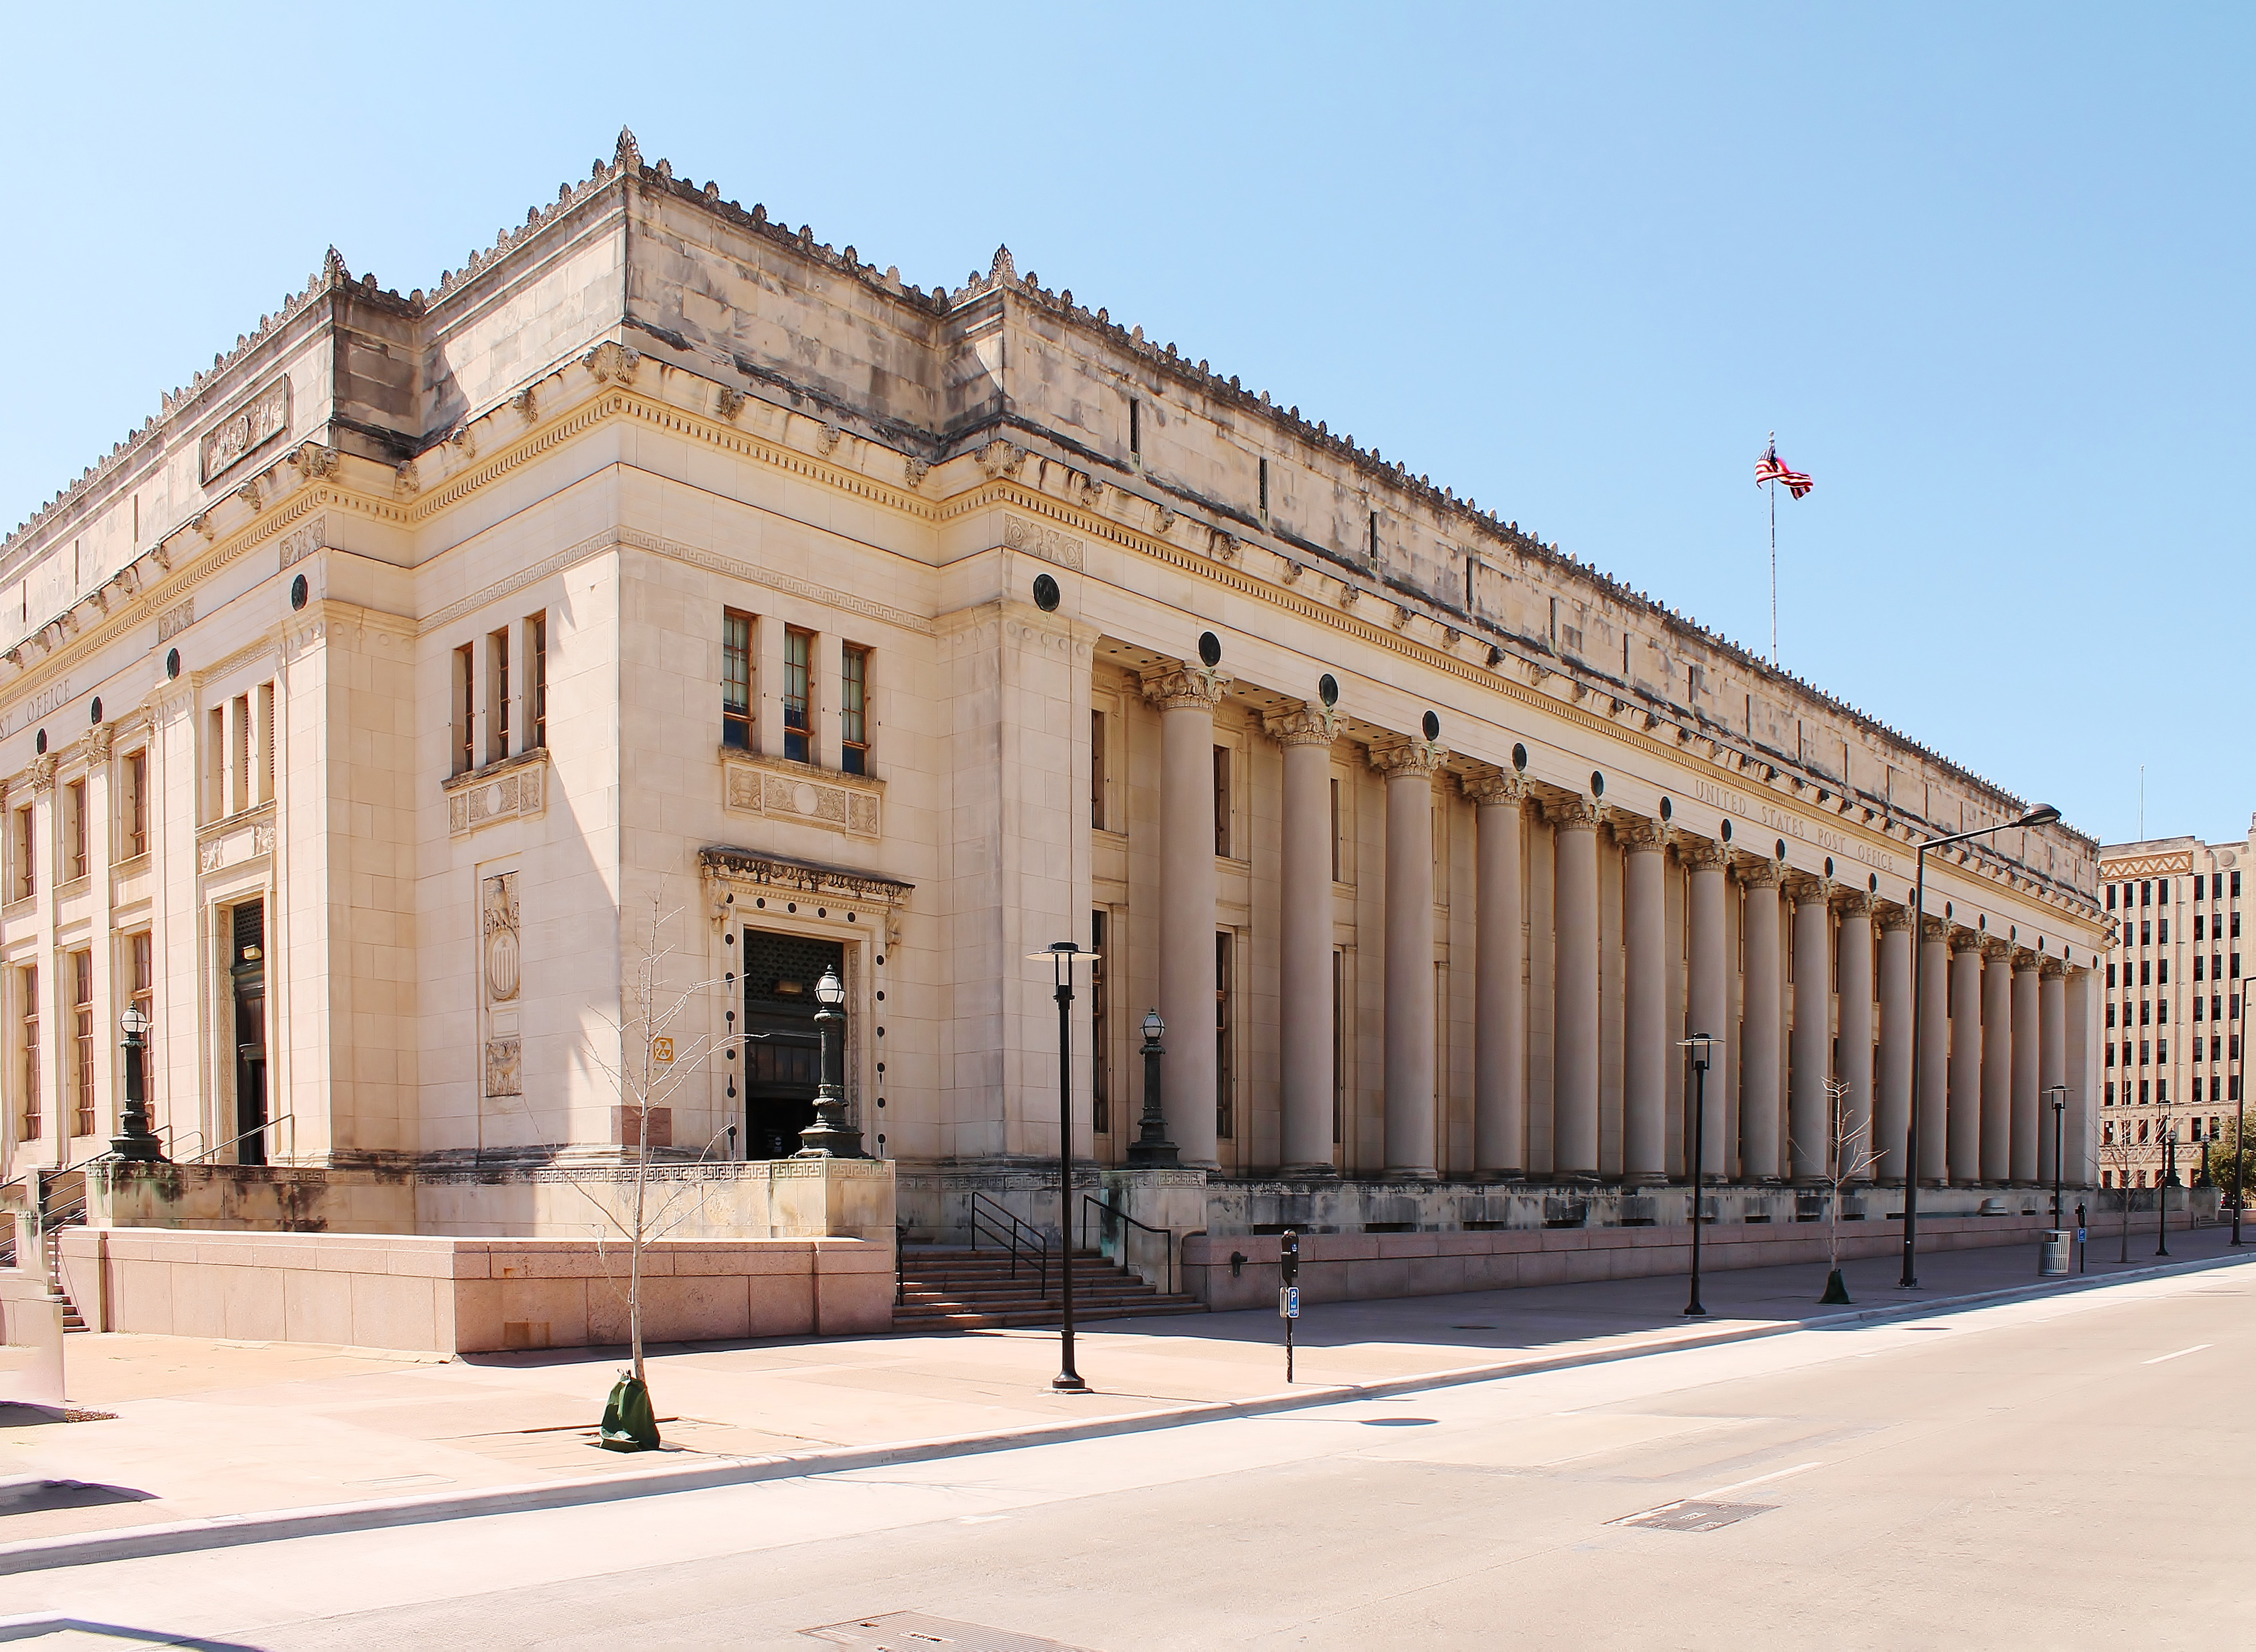 United States Post Office (Fort Worth, Texas) - Wikipedia